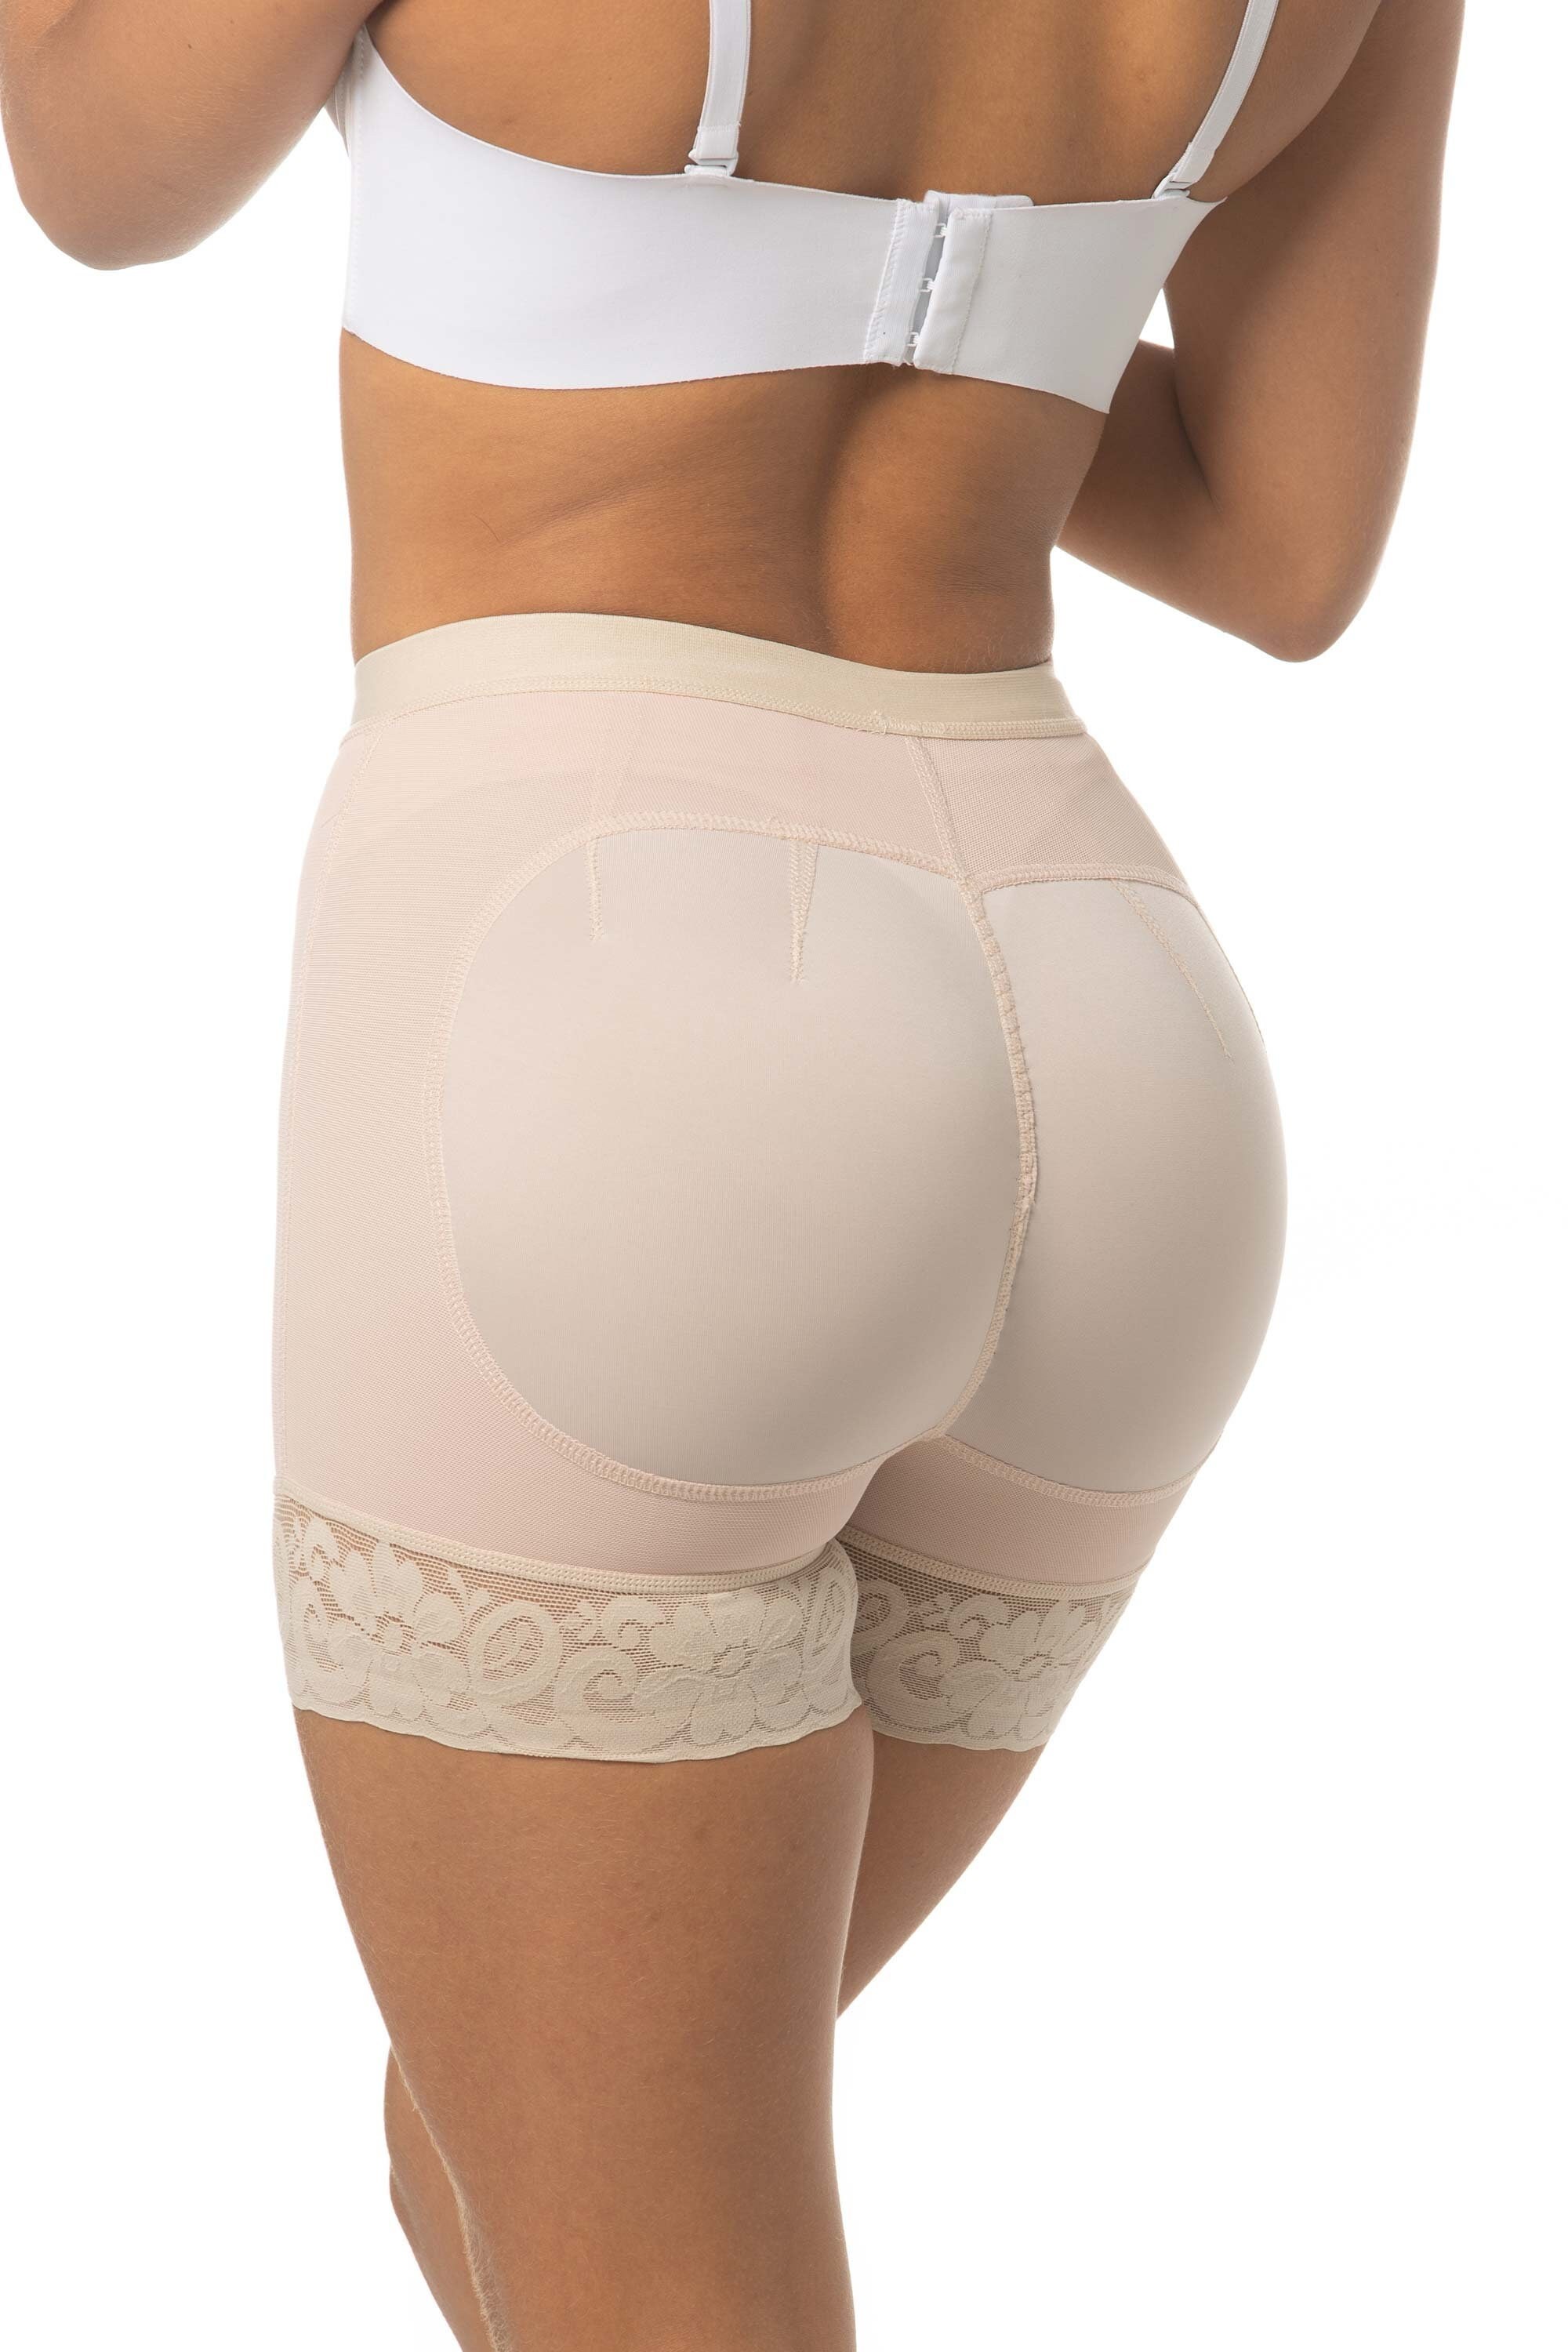 Short Girdles Shorts to Enhance the Buttocks/ Sculpting Lingerie/ Belly  Control Panties/ Underwear/gift Offered/shapewear 